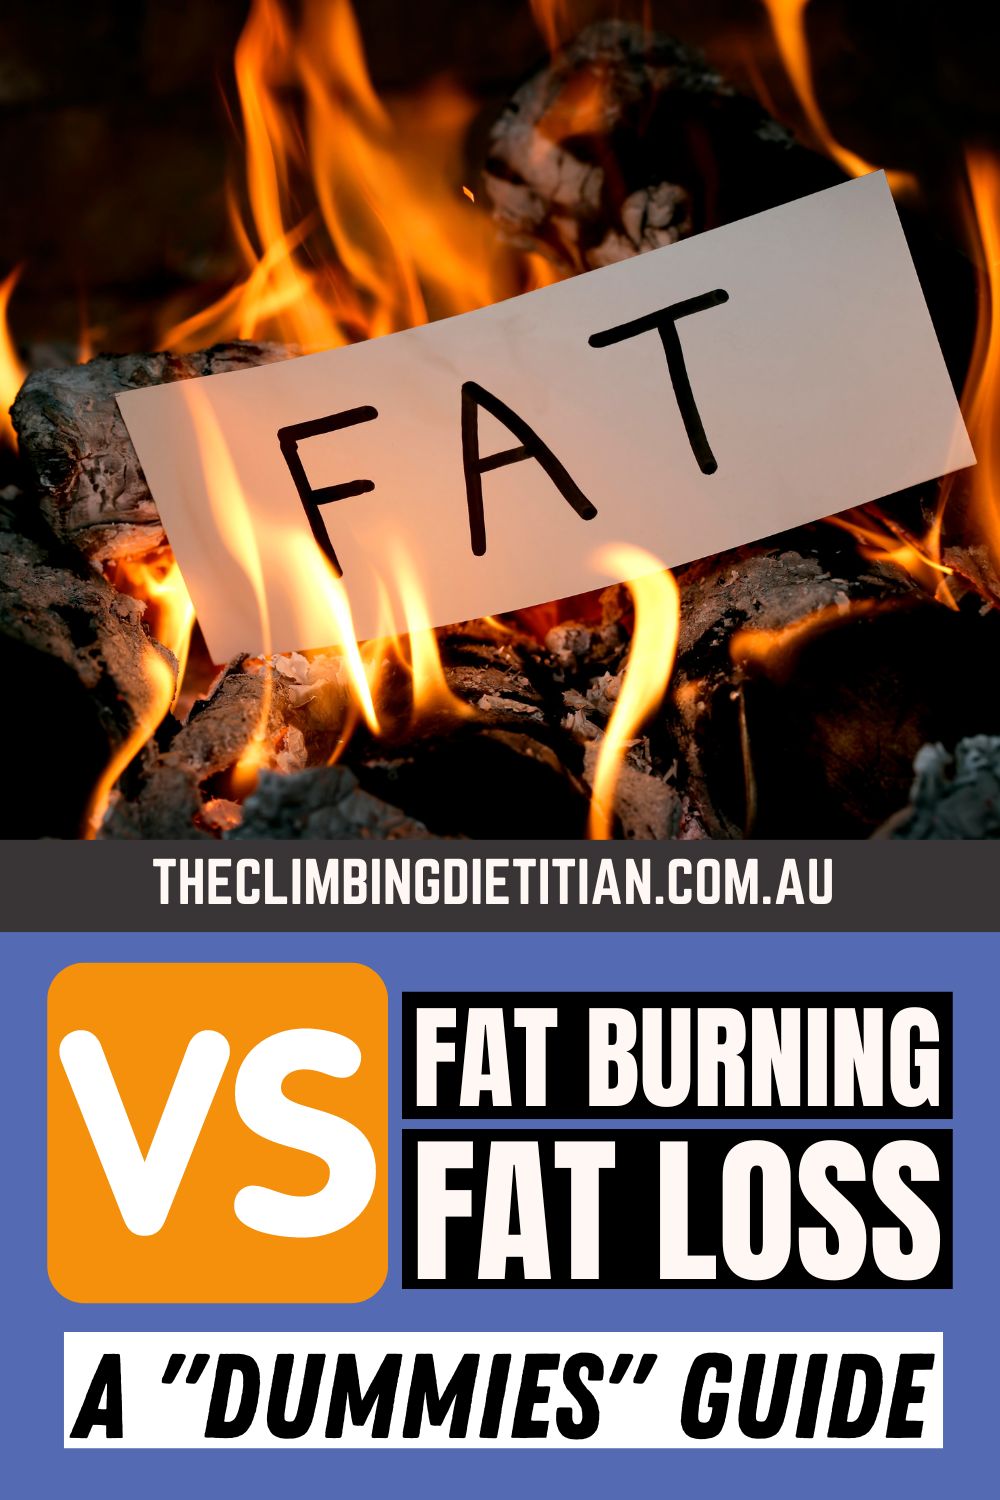 What Is The Difference Between Fat Burn vs Fat Loss A Dummies Guide